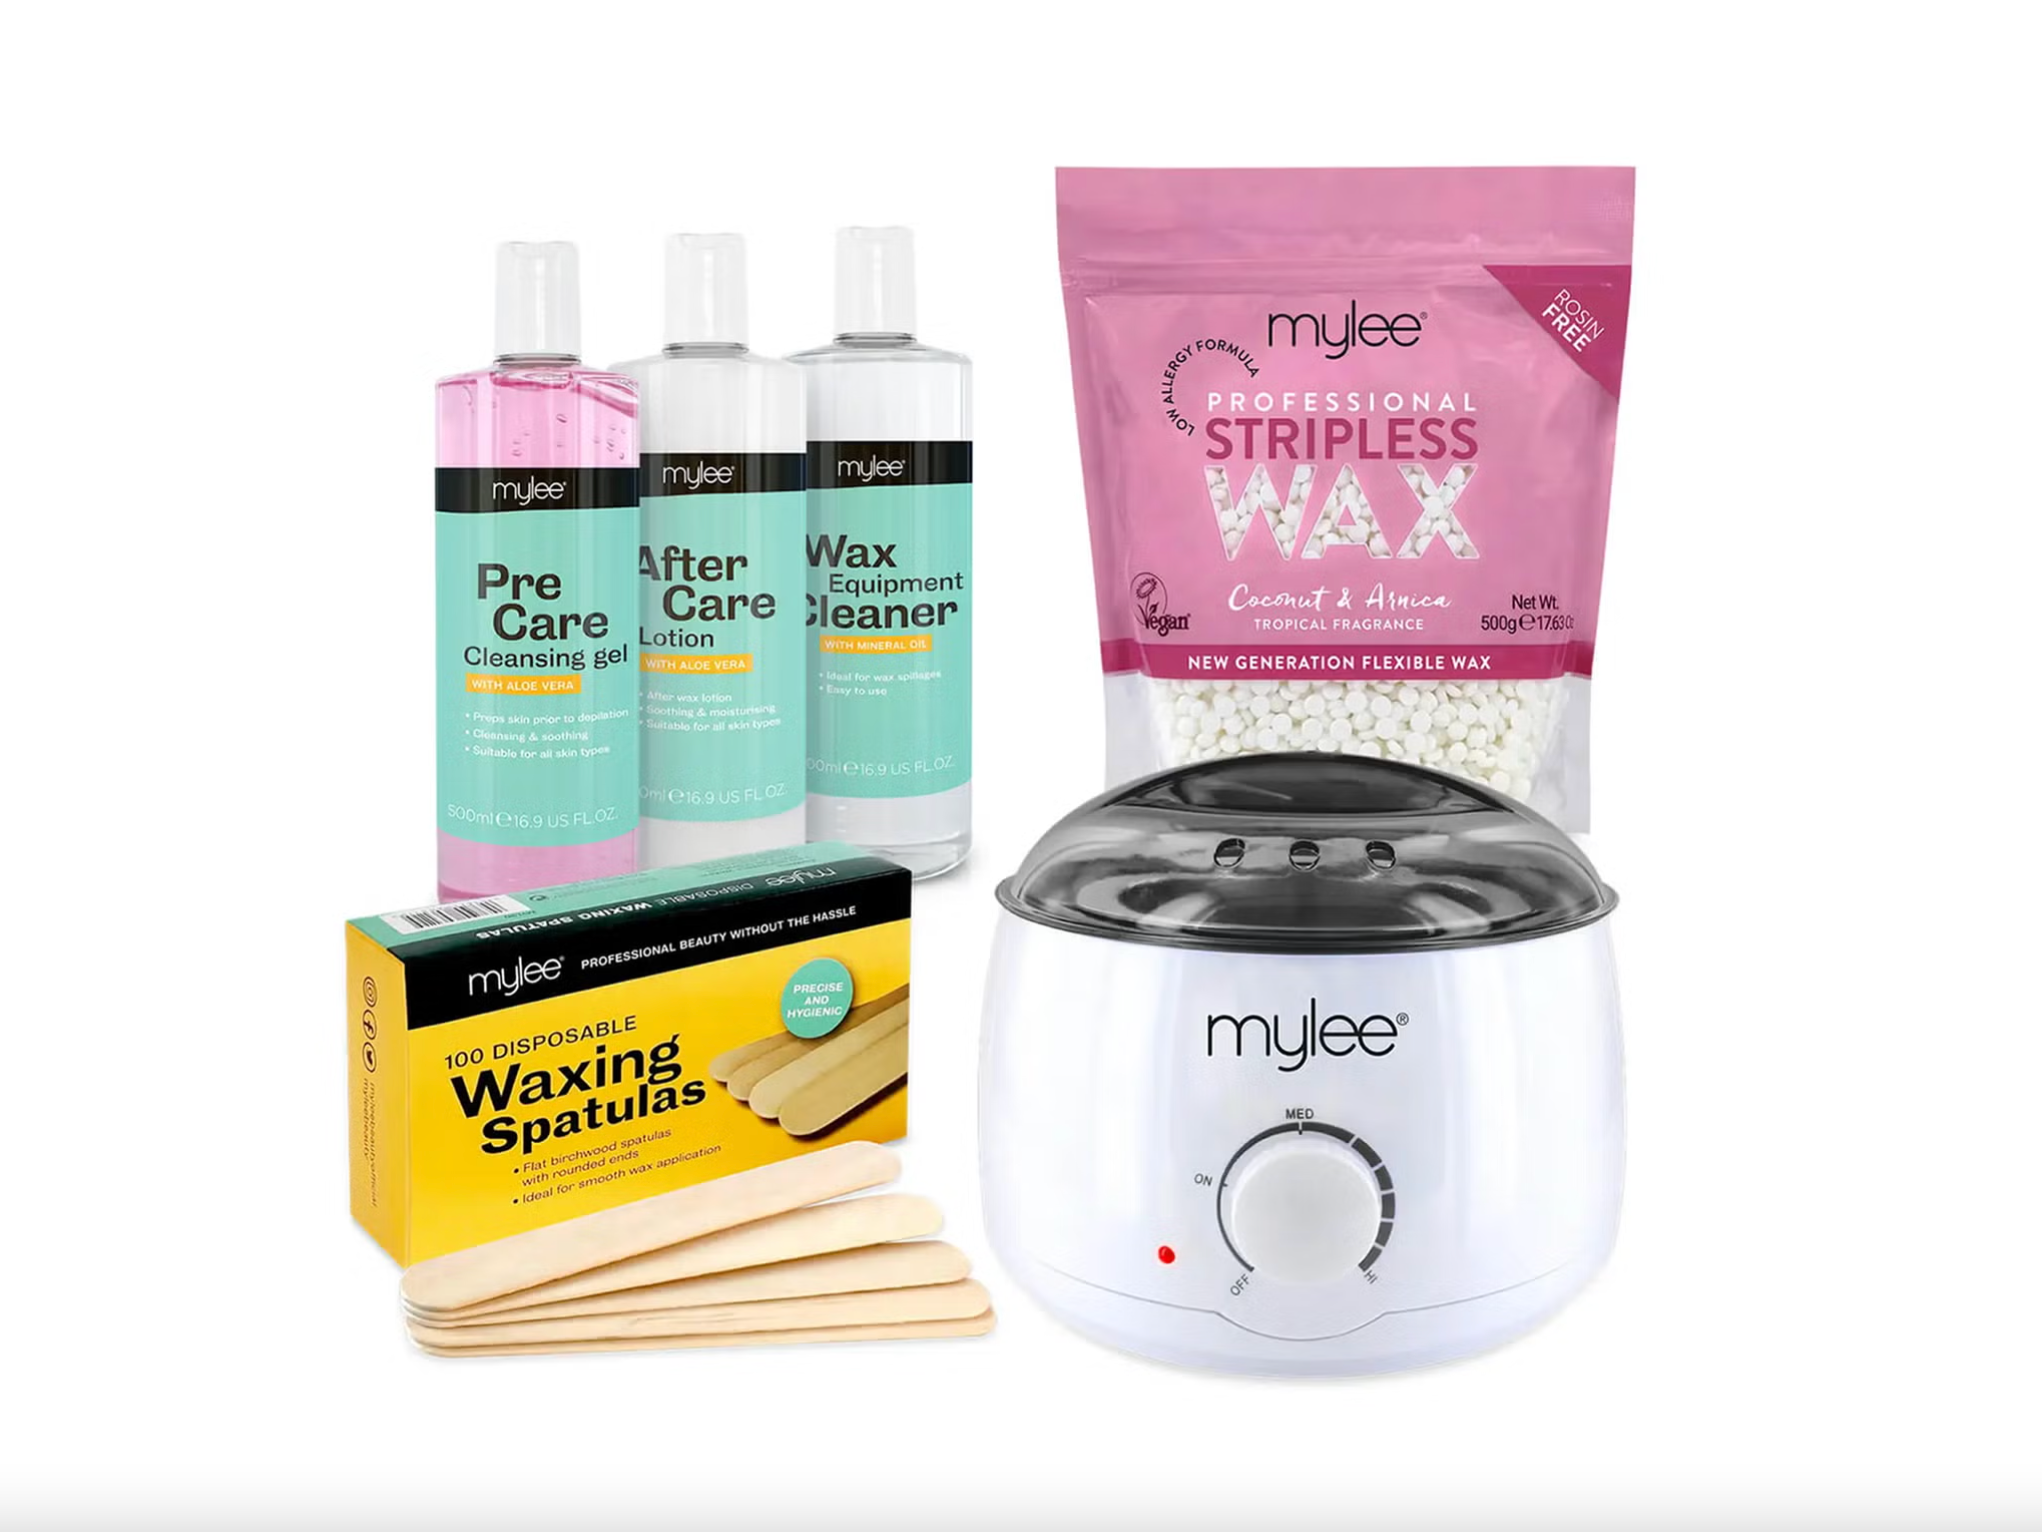 This Mylee kit is safe to use all over the body, even intimate areas